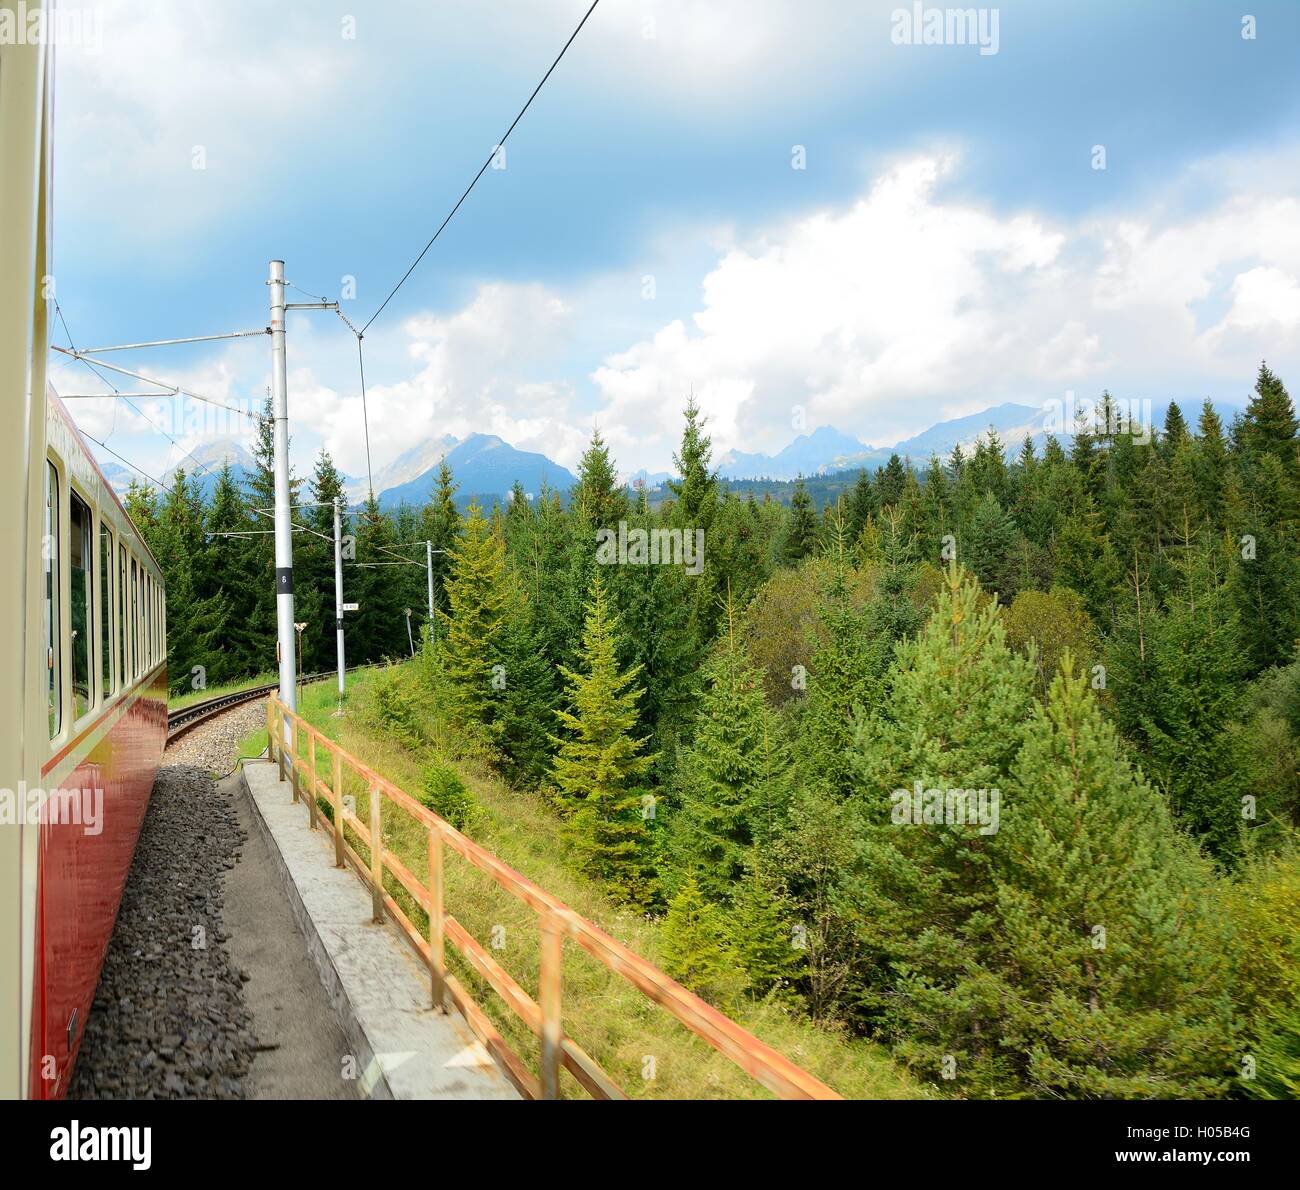 View of High Tatras mountains from window of speeding train on cog railway during way from Strba station to Strbske Pleso statio Stock Photo